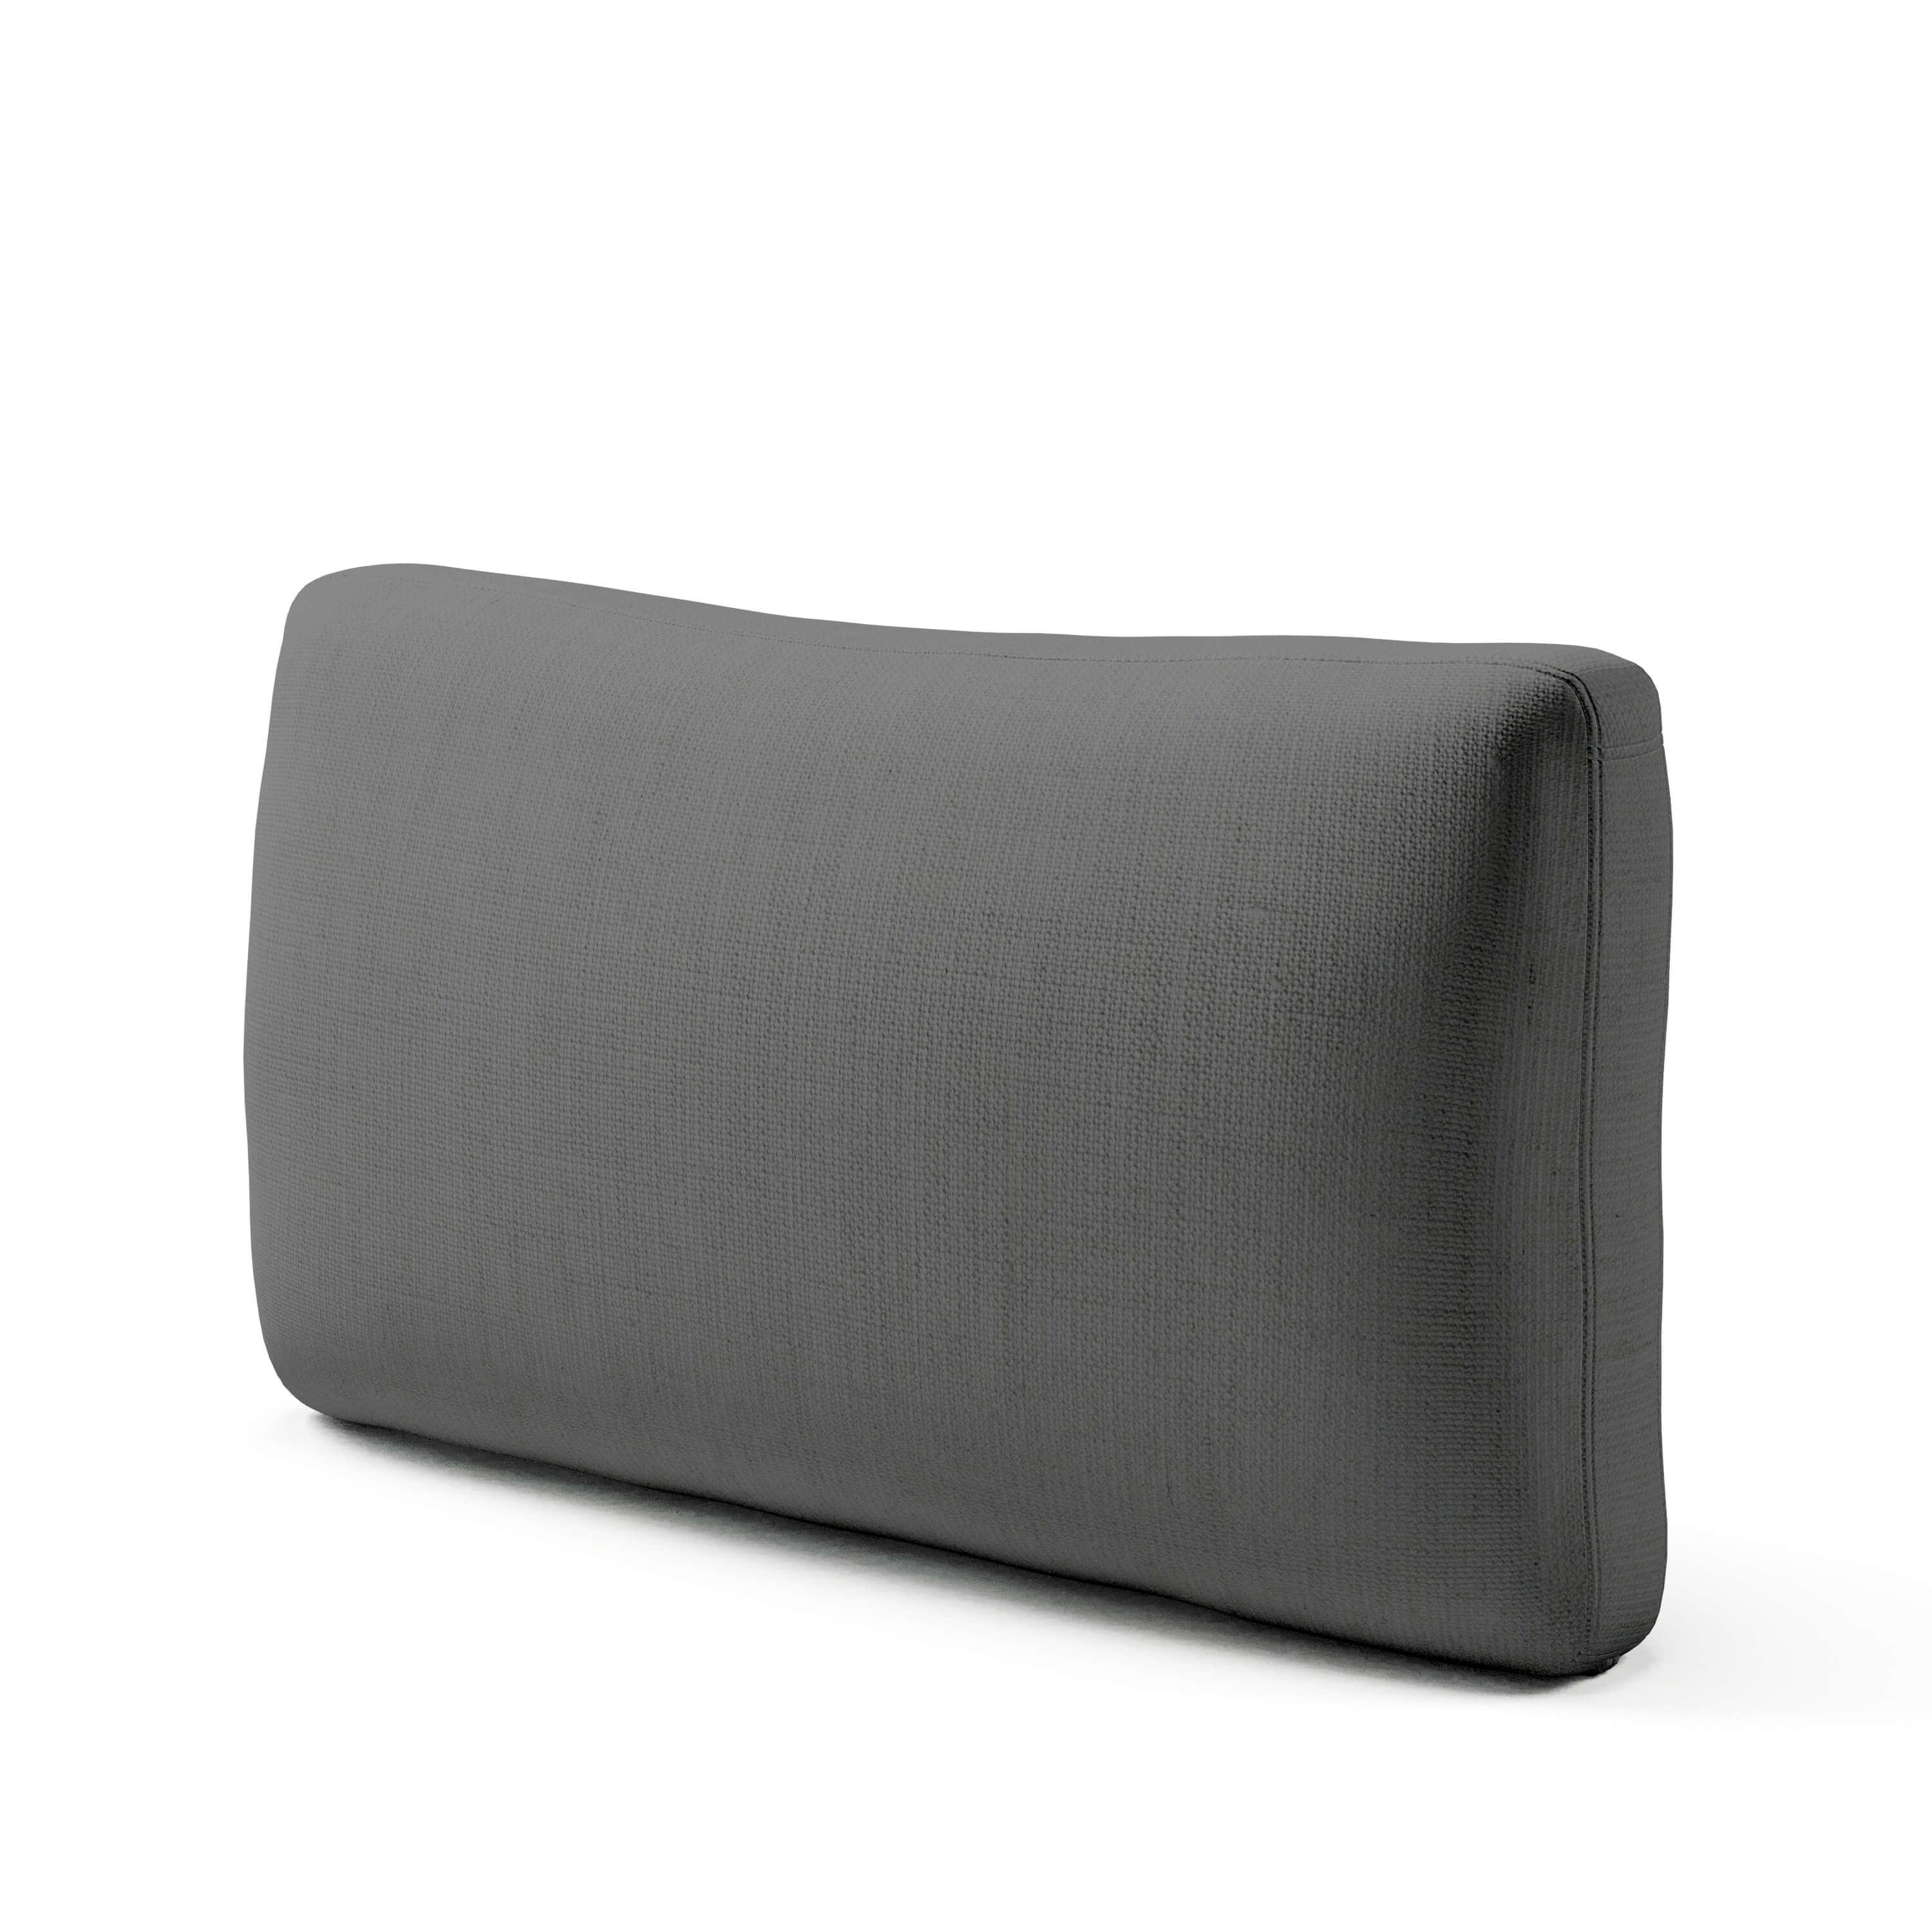 Comfy Sofa - Back Cushion Replacement